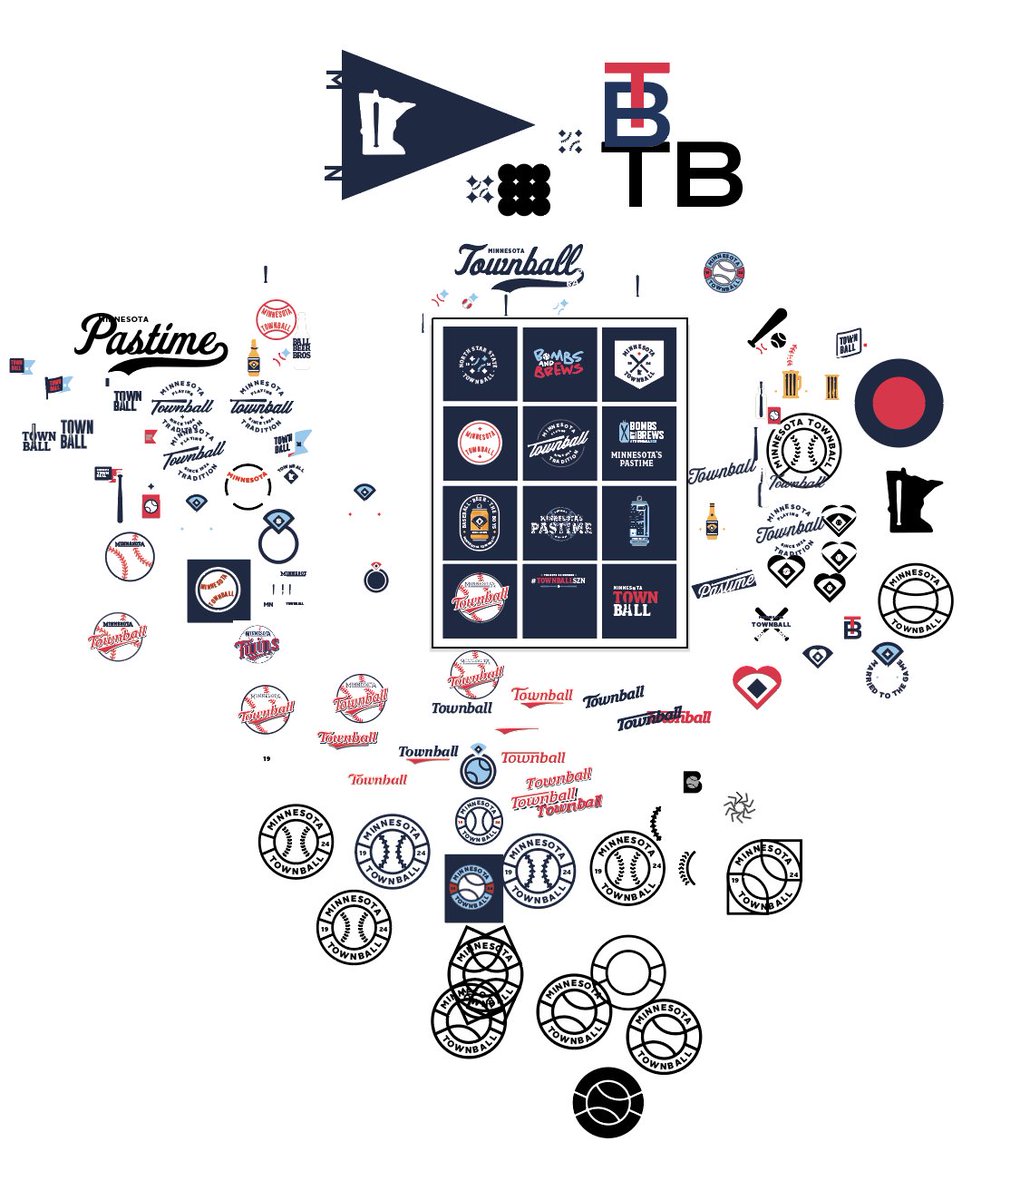 Here's what the artboard looked like when designing this season's #Townball collection. See something you like in this beautiful mess? Comment below on what design you might like for next season.

#MNbaseball #Baseball #MN #Minnesota #Design #LogoDesign #BadgeDesign #Badges